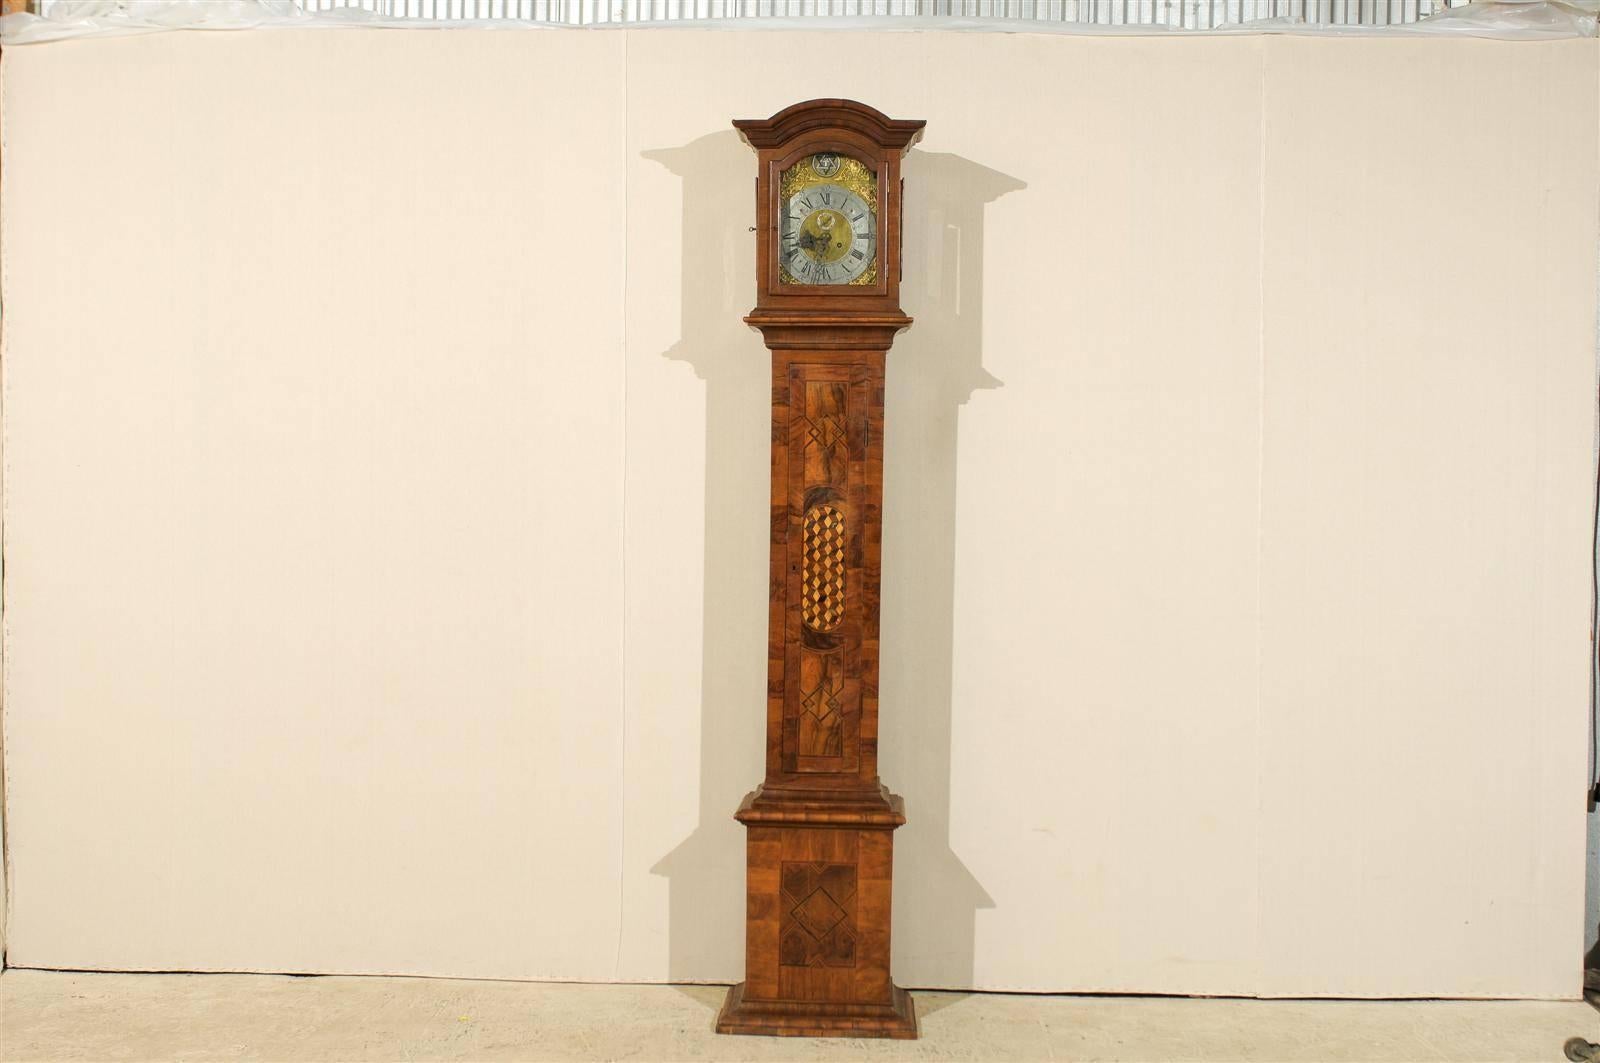 A 19th century Swedish clock. This exquisite Swedish clock features an elegant and rich wood finish. It is capped with a signature bonnet style crest. The linear profile is echoed in the geometrical design above and below the checkered pattern, as